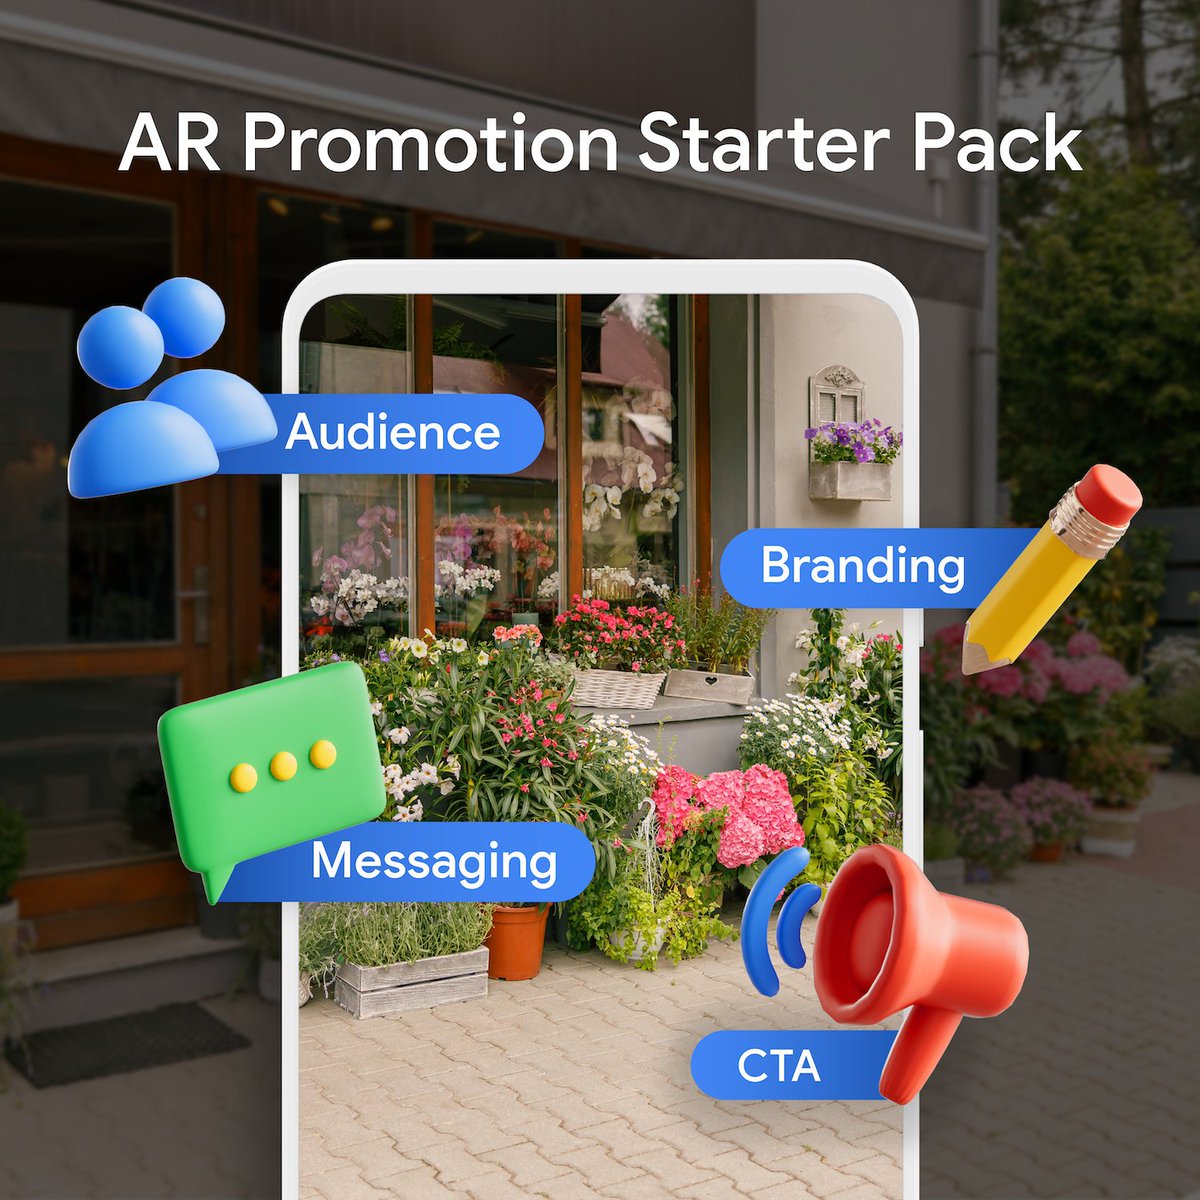 Built something cool with AR and now it’s time to promote it? Consider these fundamentals of any successful marketing plan and what strategy works best for your product.